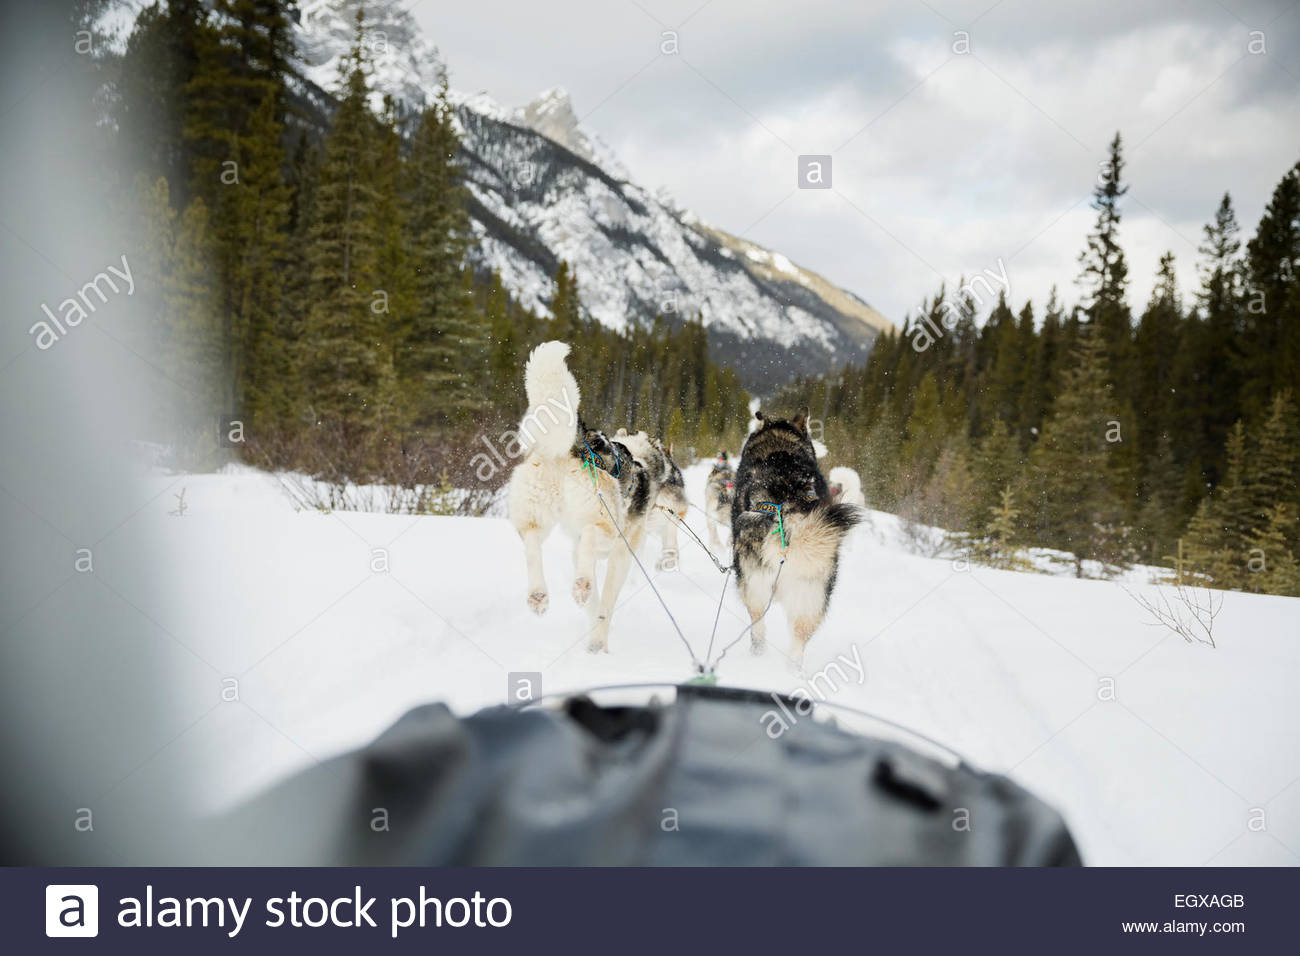 Dogsled on the move below snowy mountains Stock Photo